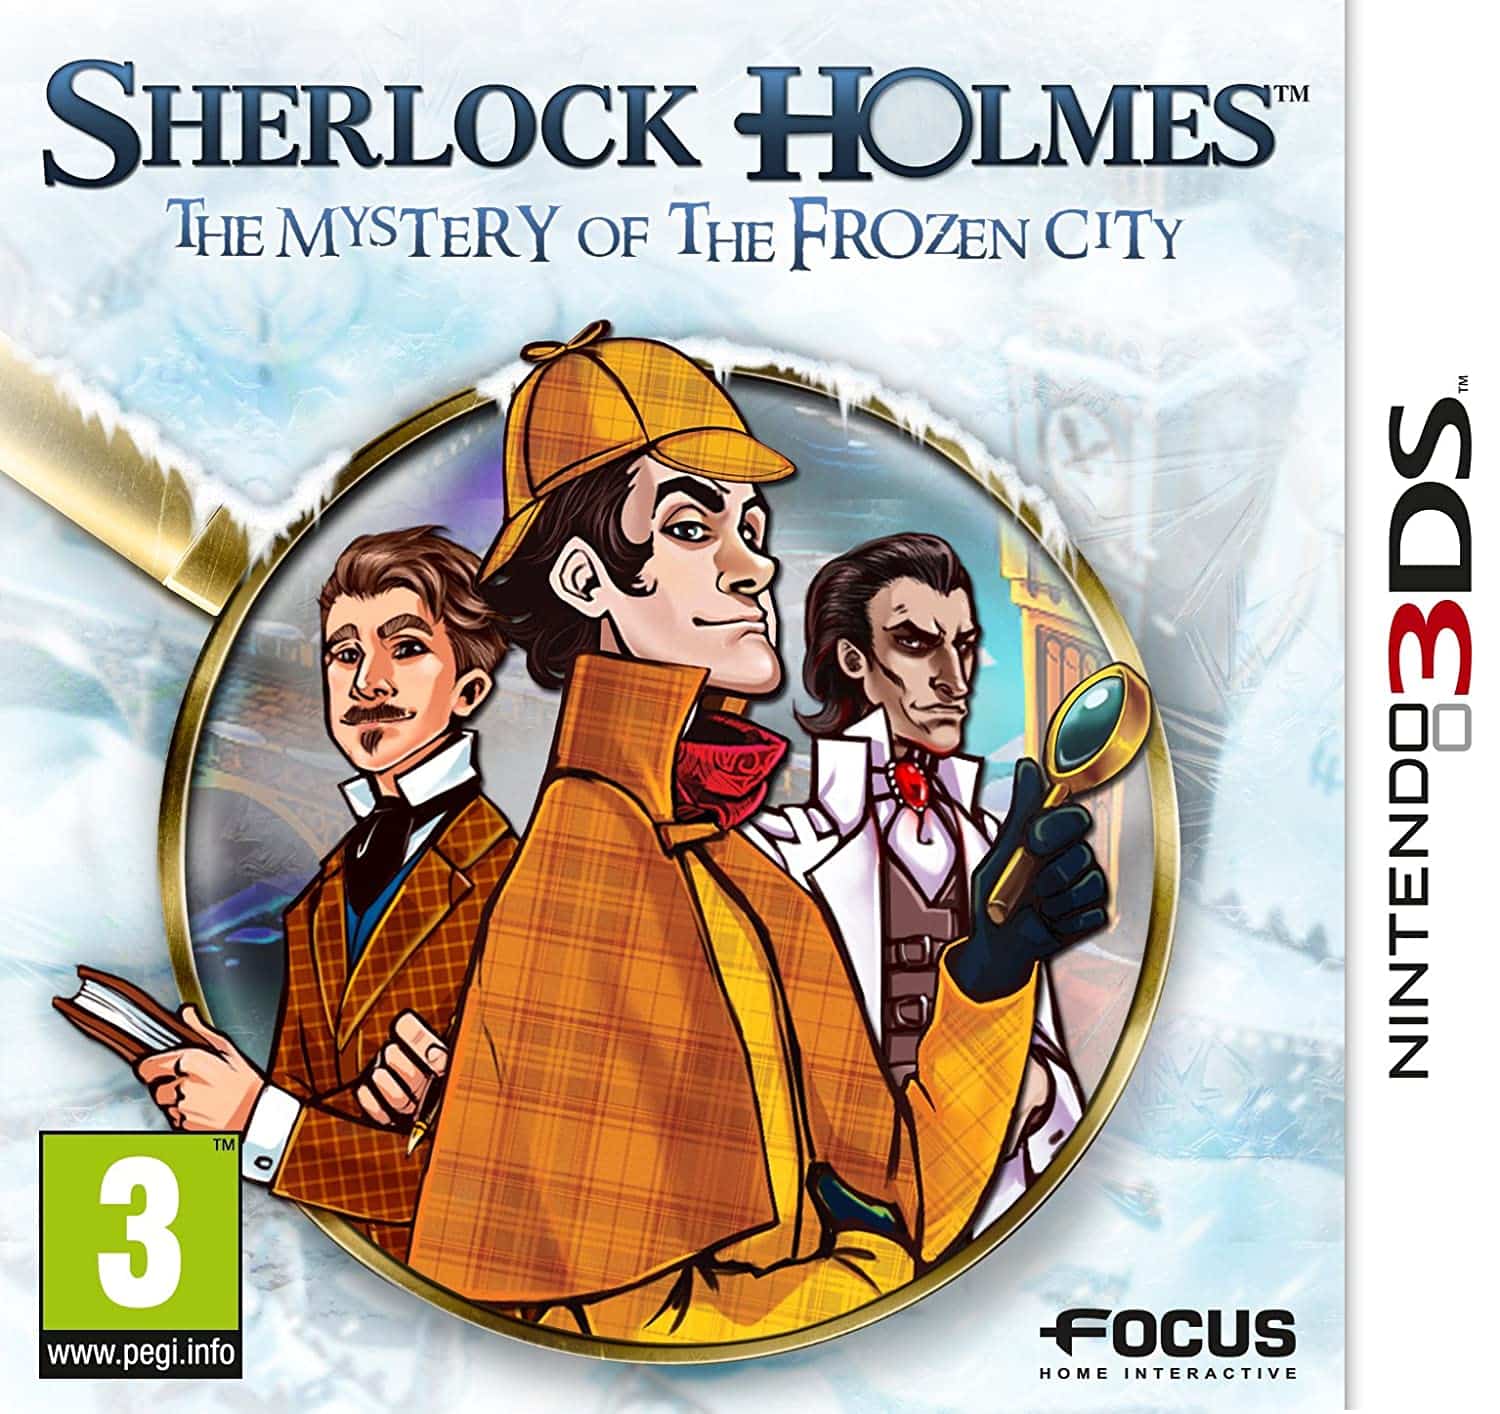 Sherlock Holmes and The Mystery of the Frozen City player count stats